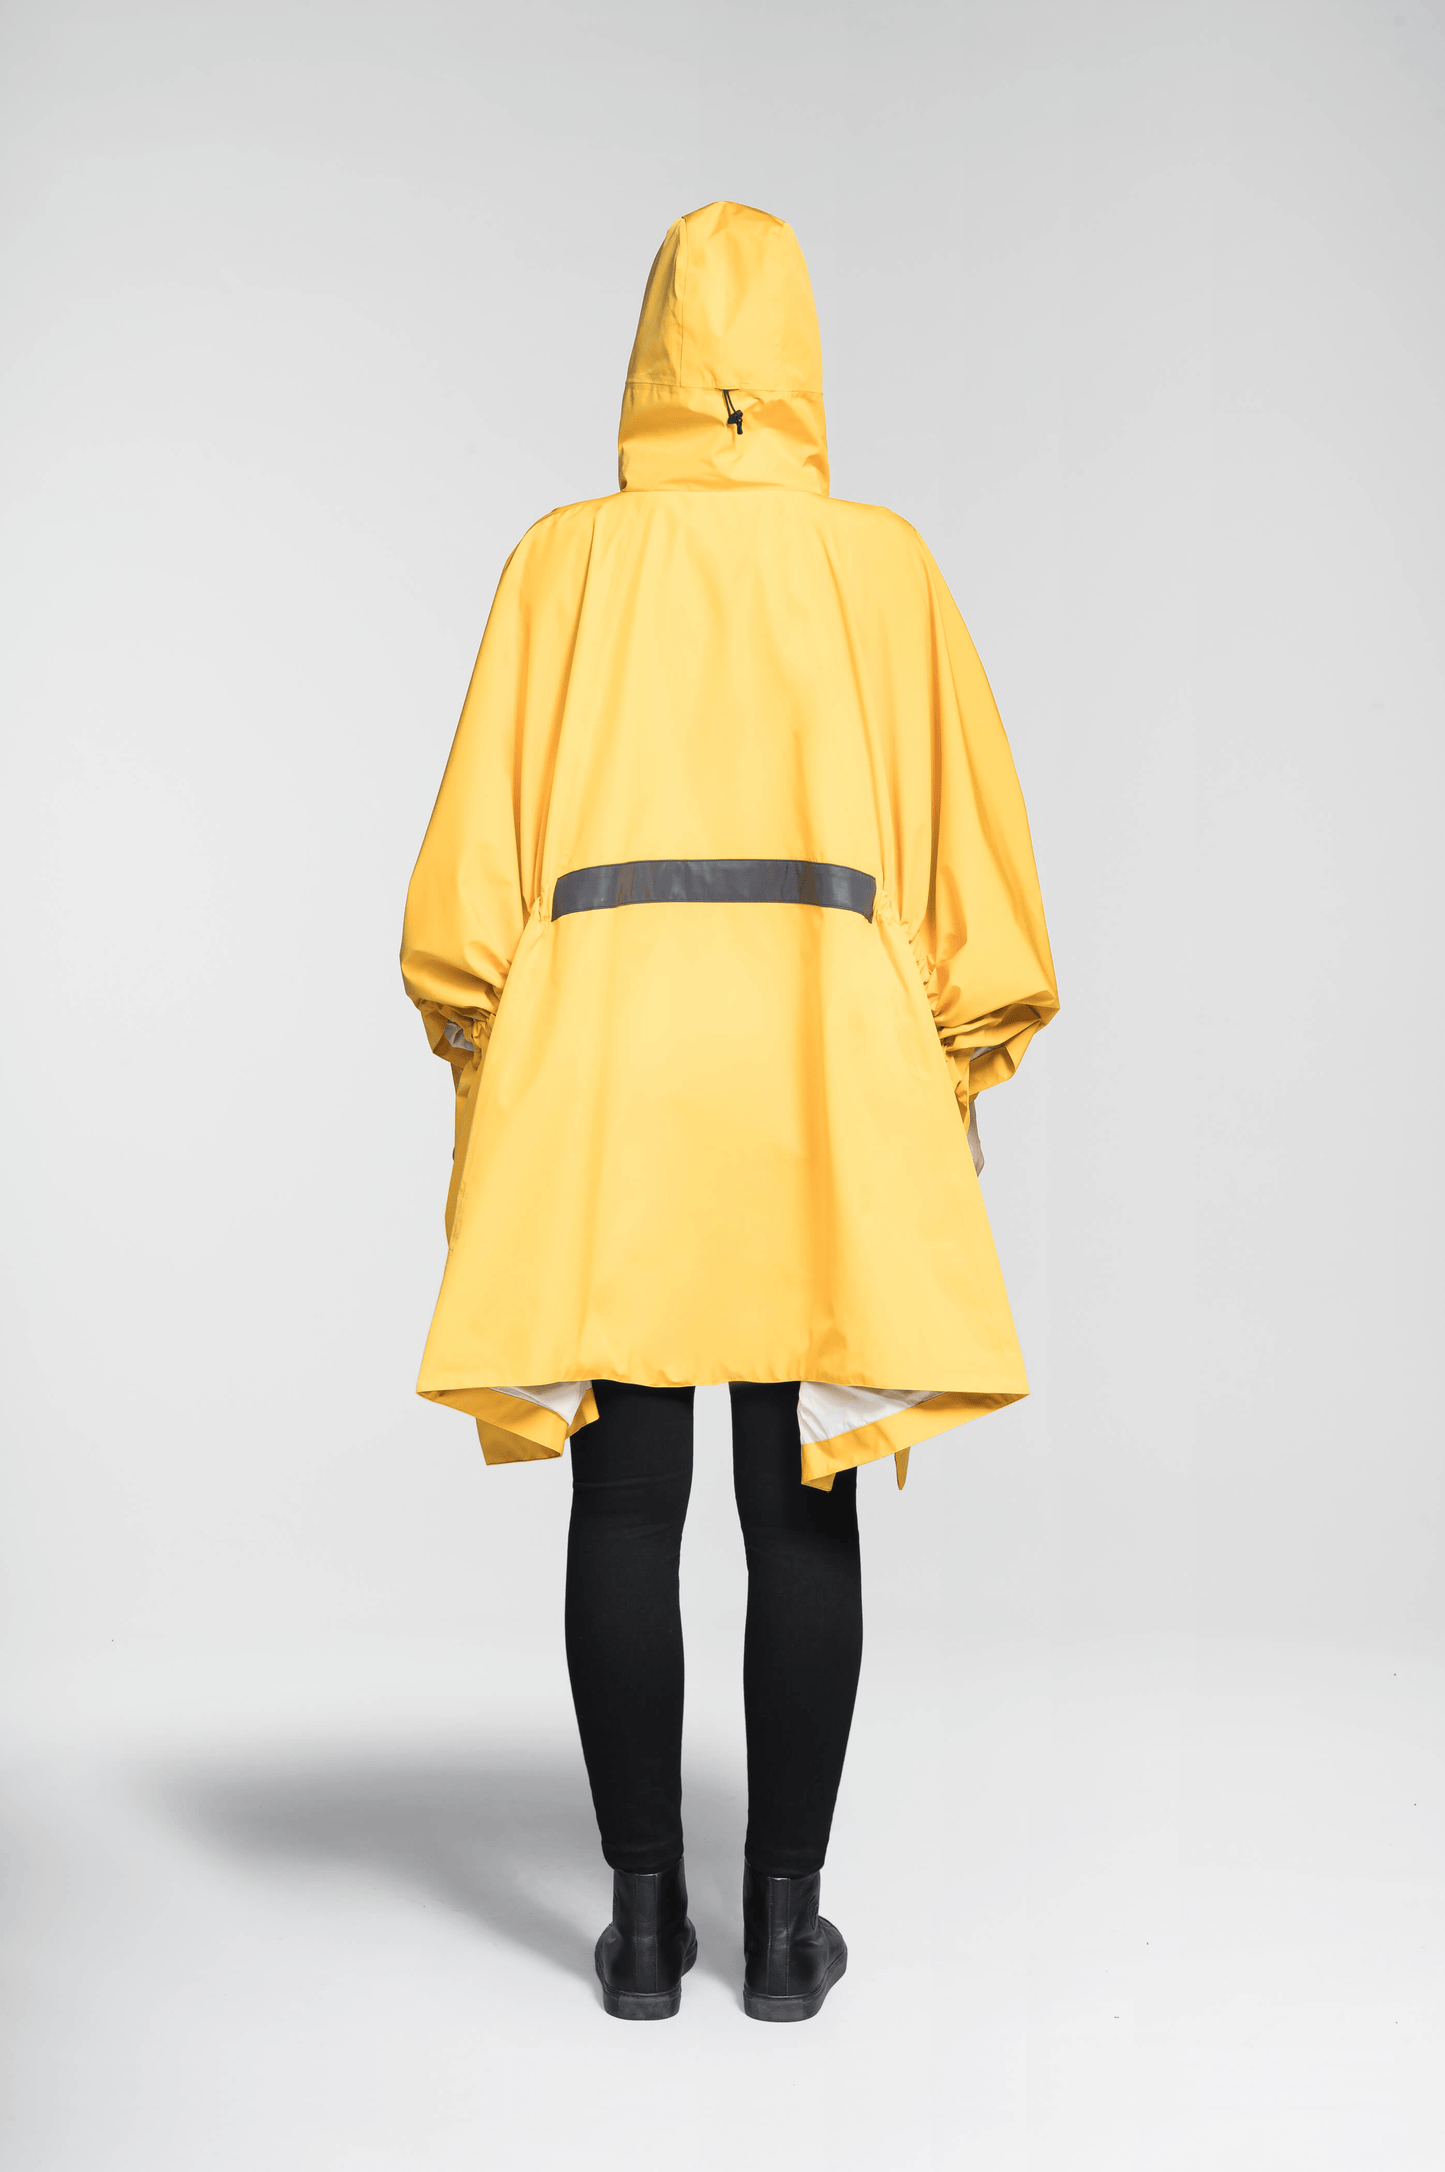 Hydra Unisex Performance Poncho in thigh length, non-removable hood, vertical half-zipper along centre front collar, hidden side-entry waist zipper pockets, adjustable webbing straps and snap closure cuffs, and packable to front kangaroo pocket with flap opening, in Old Gold